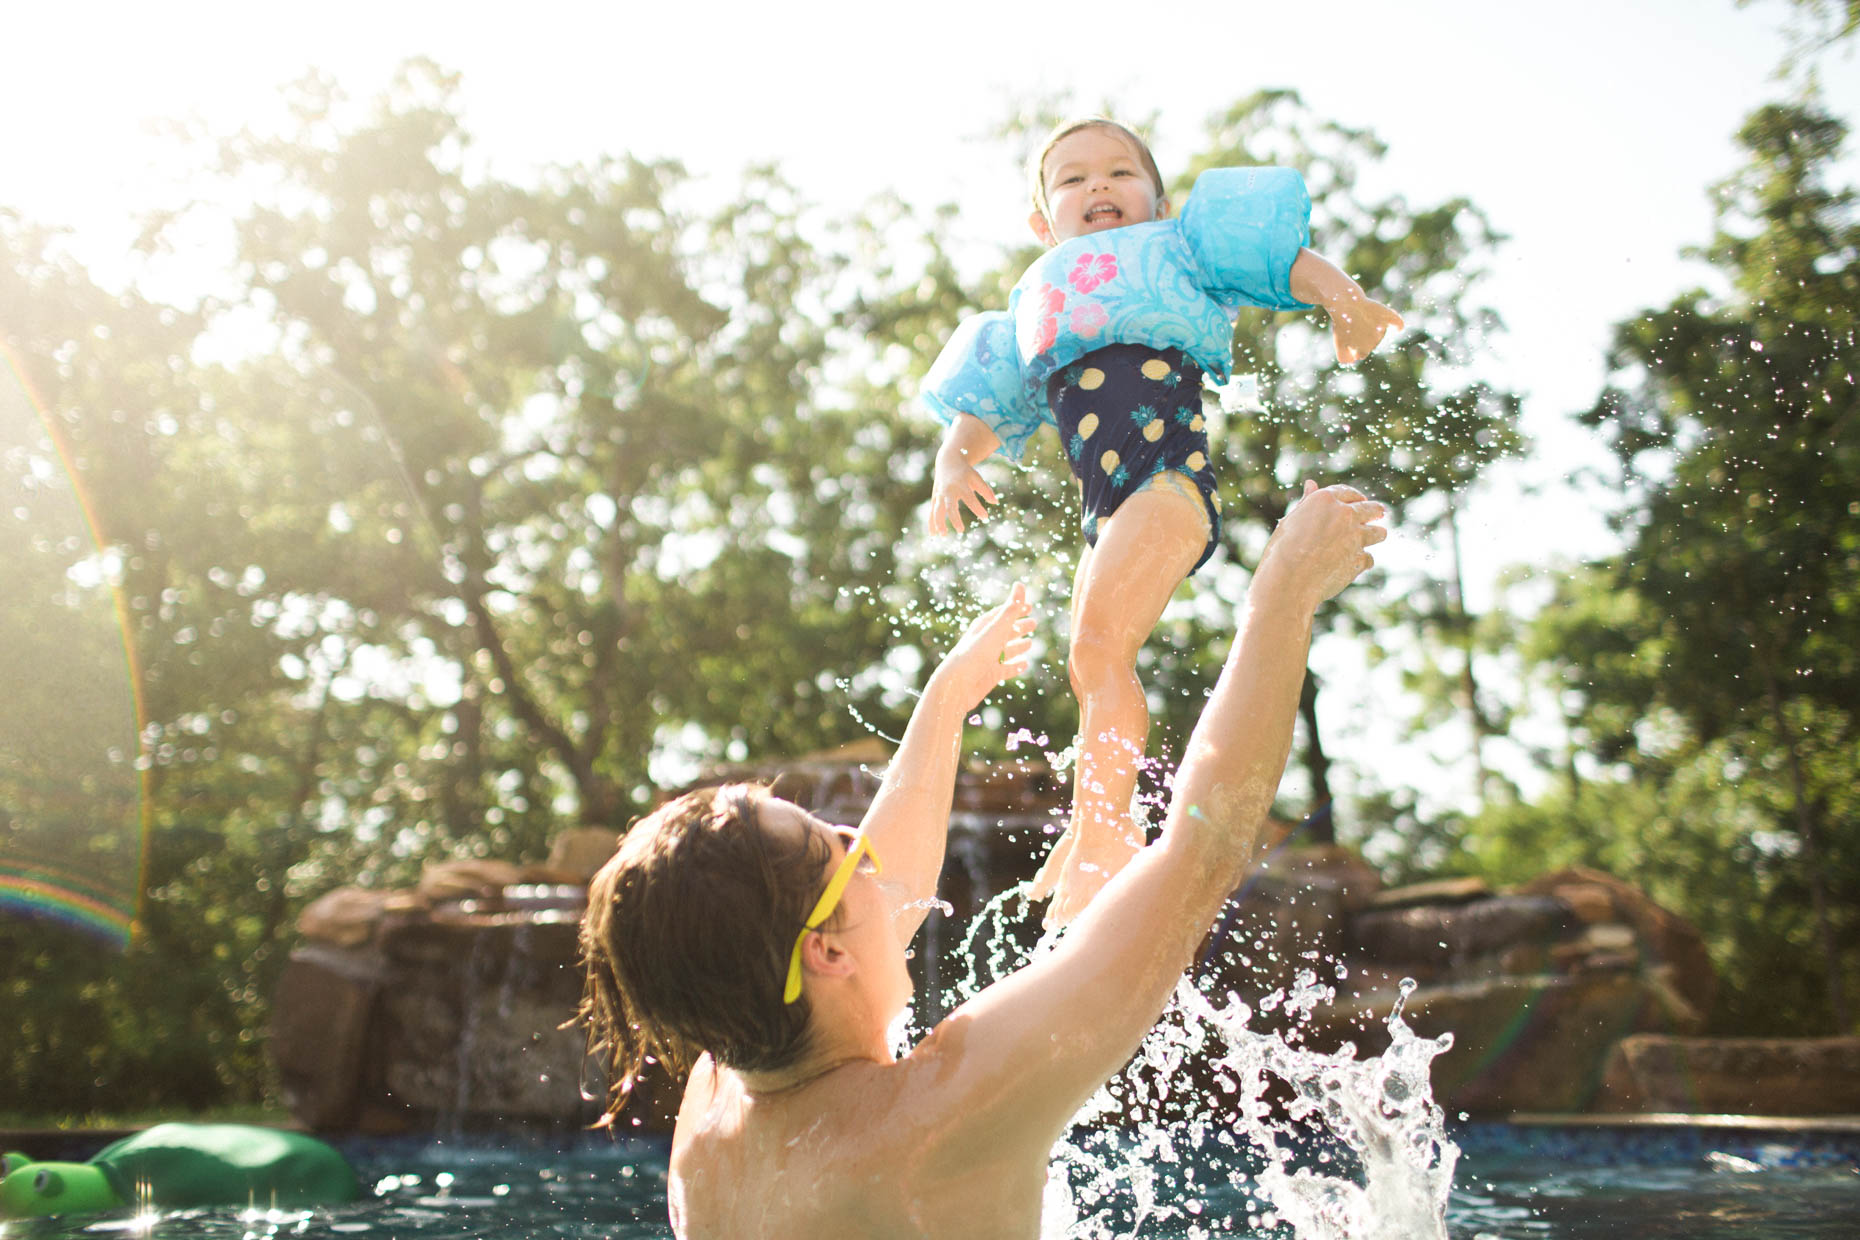 Father tossing baby girl in the air while swimming in a pool. Fun and exciting summertime photo